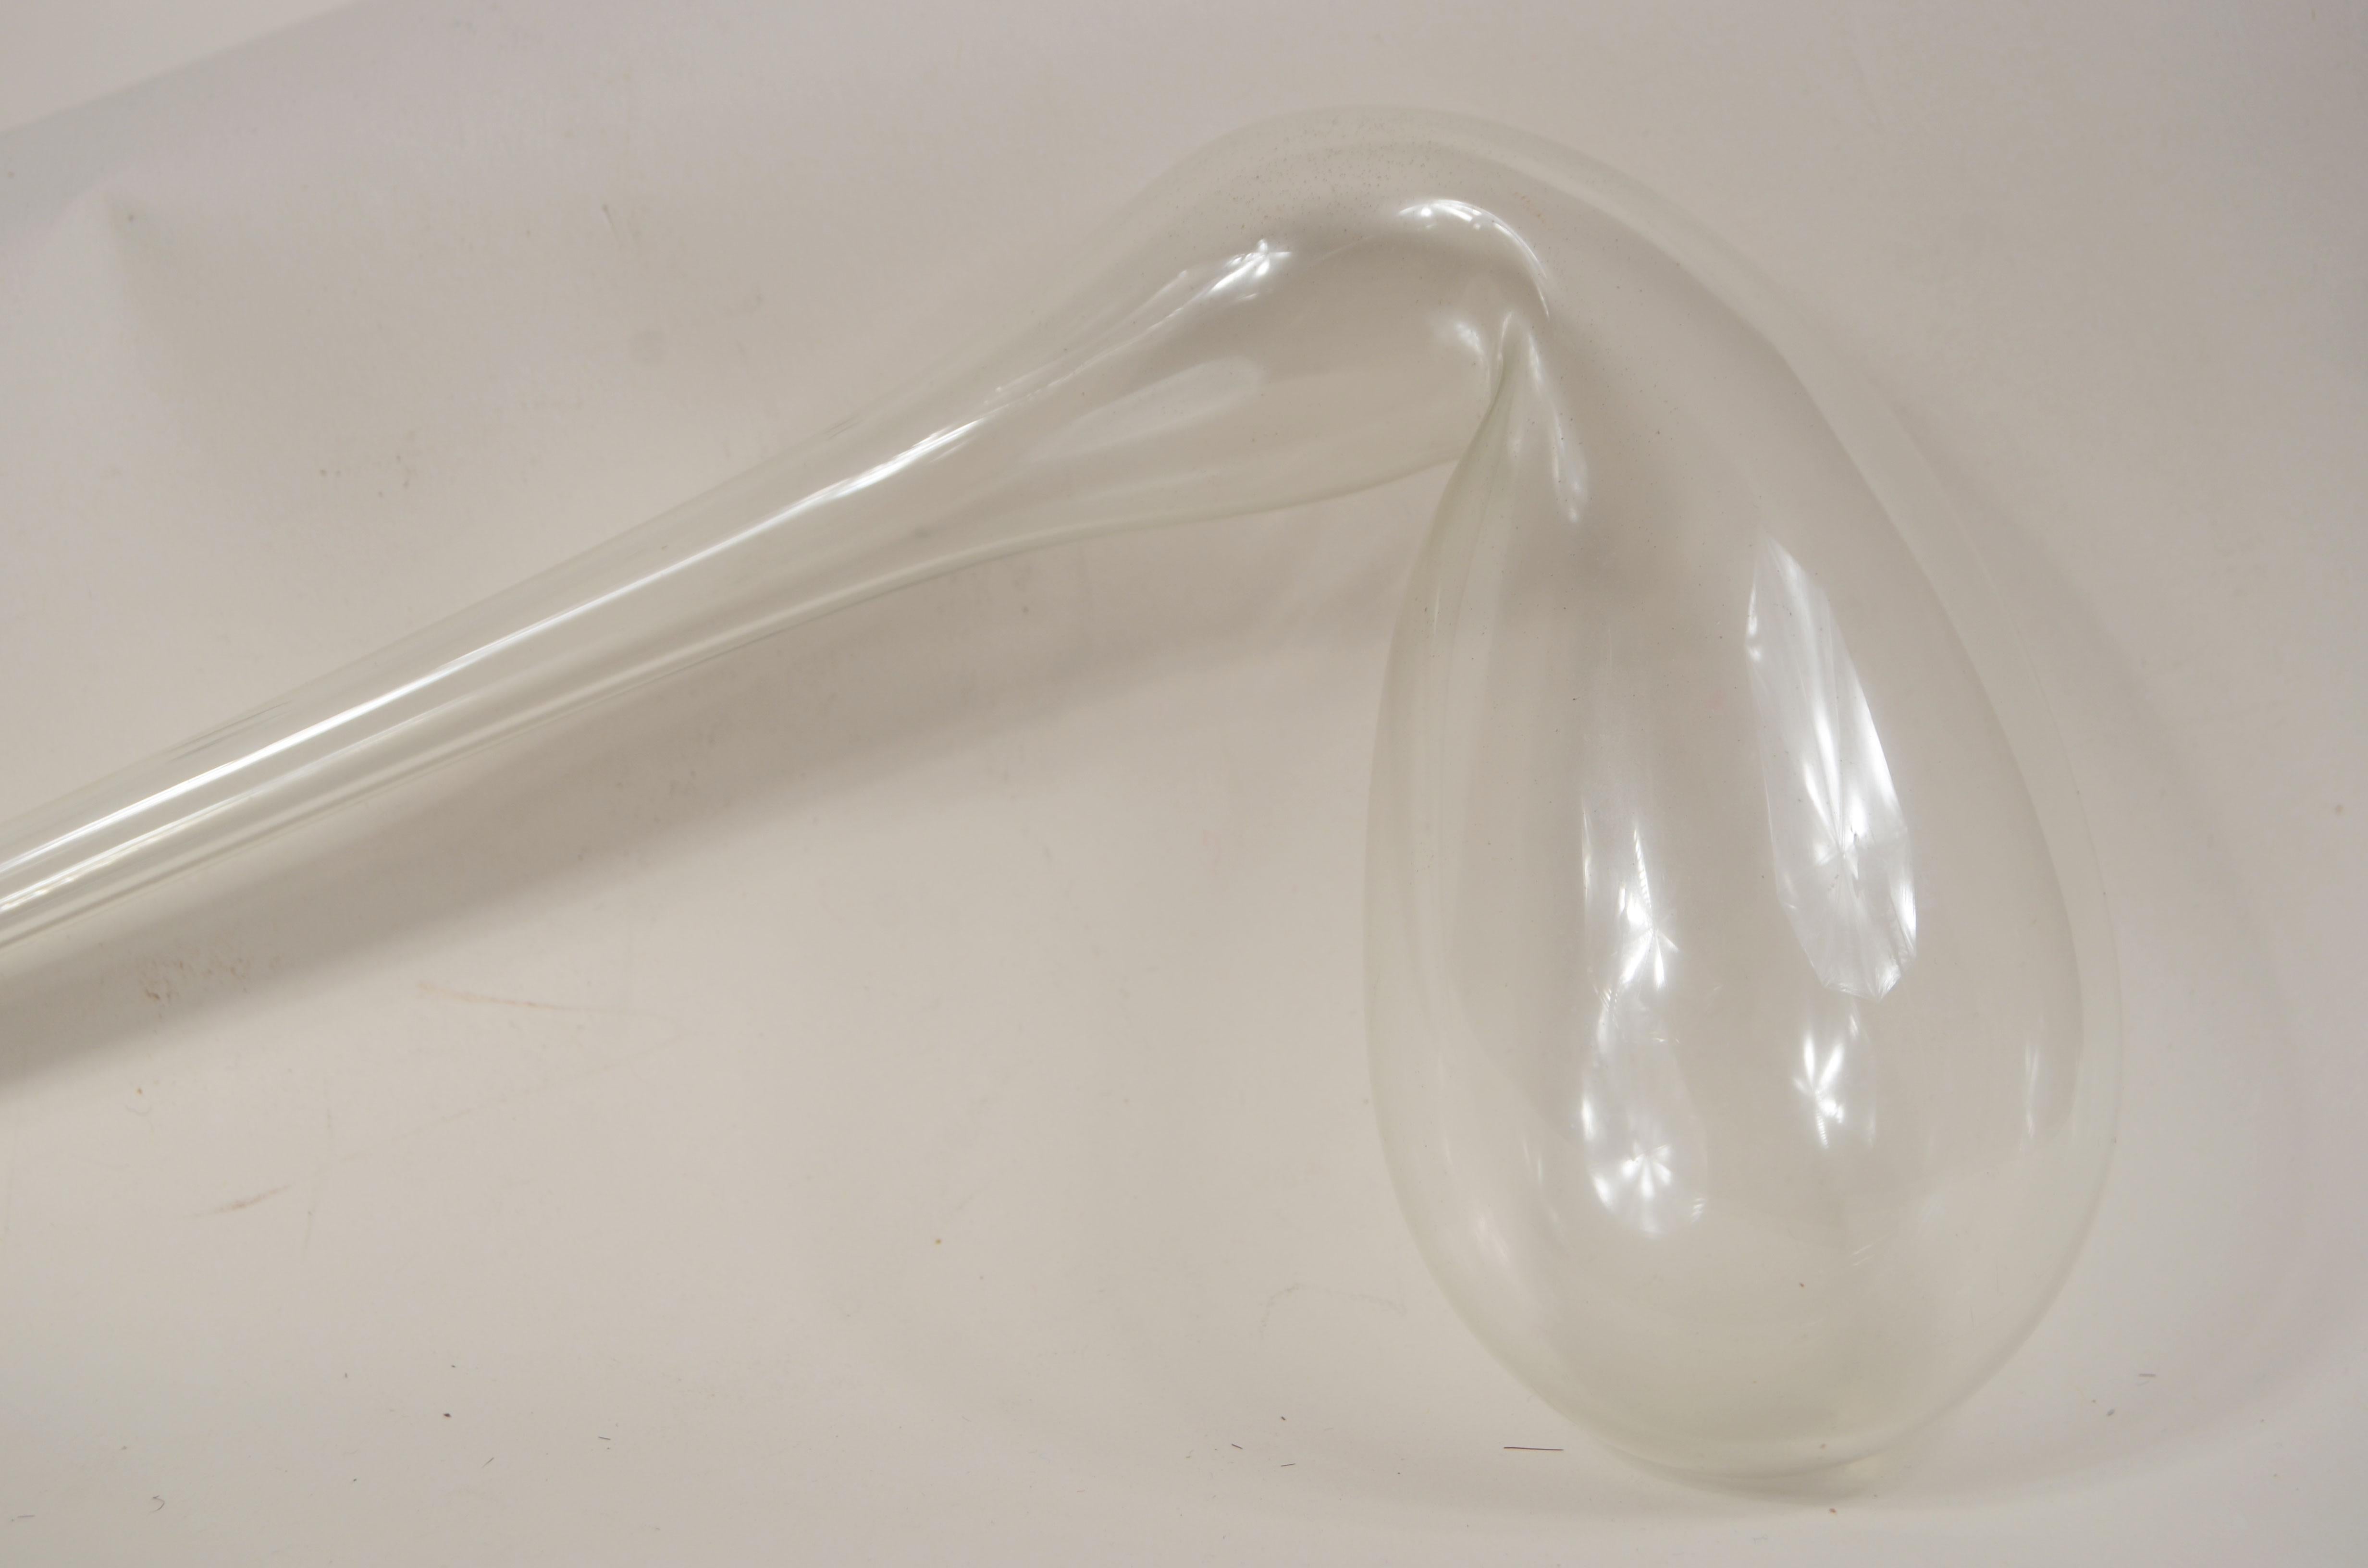 An early 19th-century transparent blown glass laboratory retort used for distillation, it has a pyriform body and long neck bent downward that gradually narrows toward the mouth. 
Bon état. Measures length cm 32.5 - inch 12.7, height cm 15 -inch